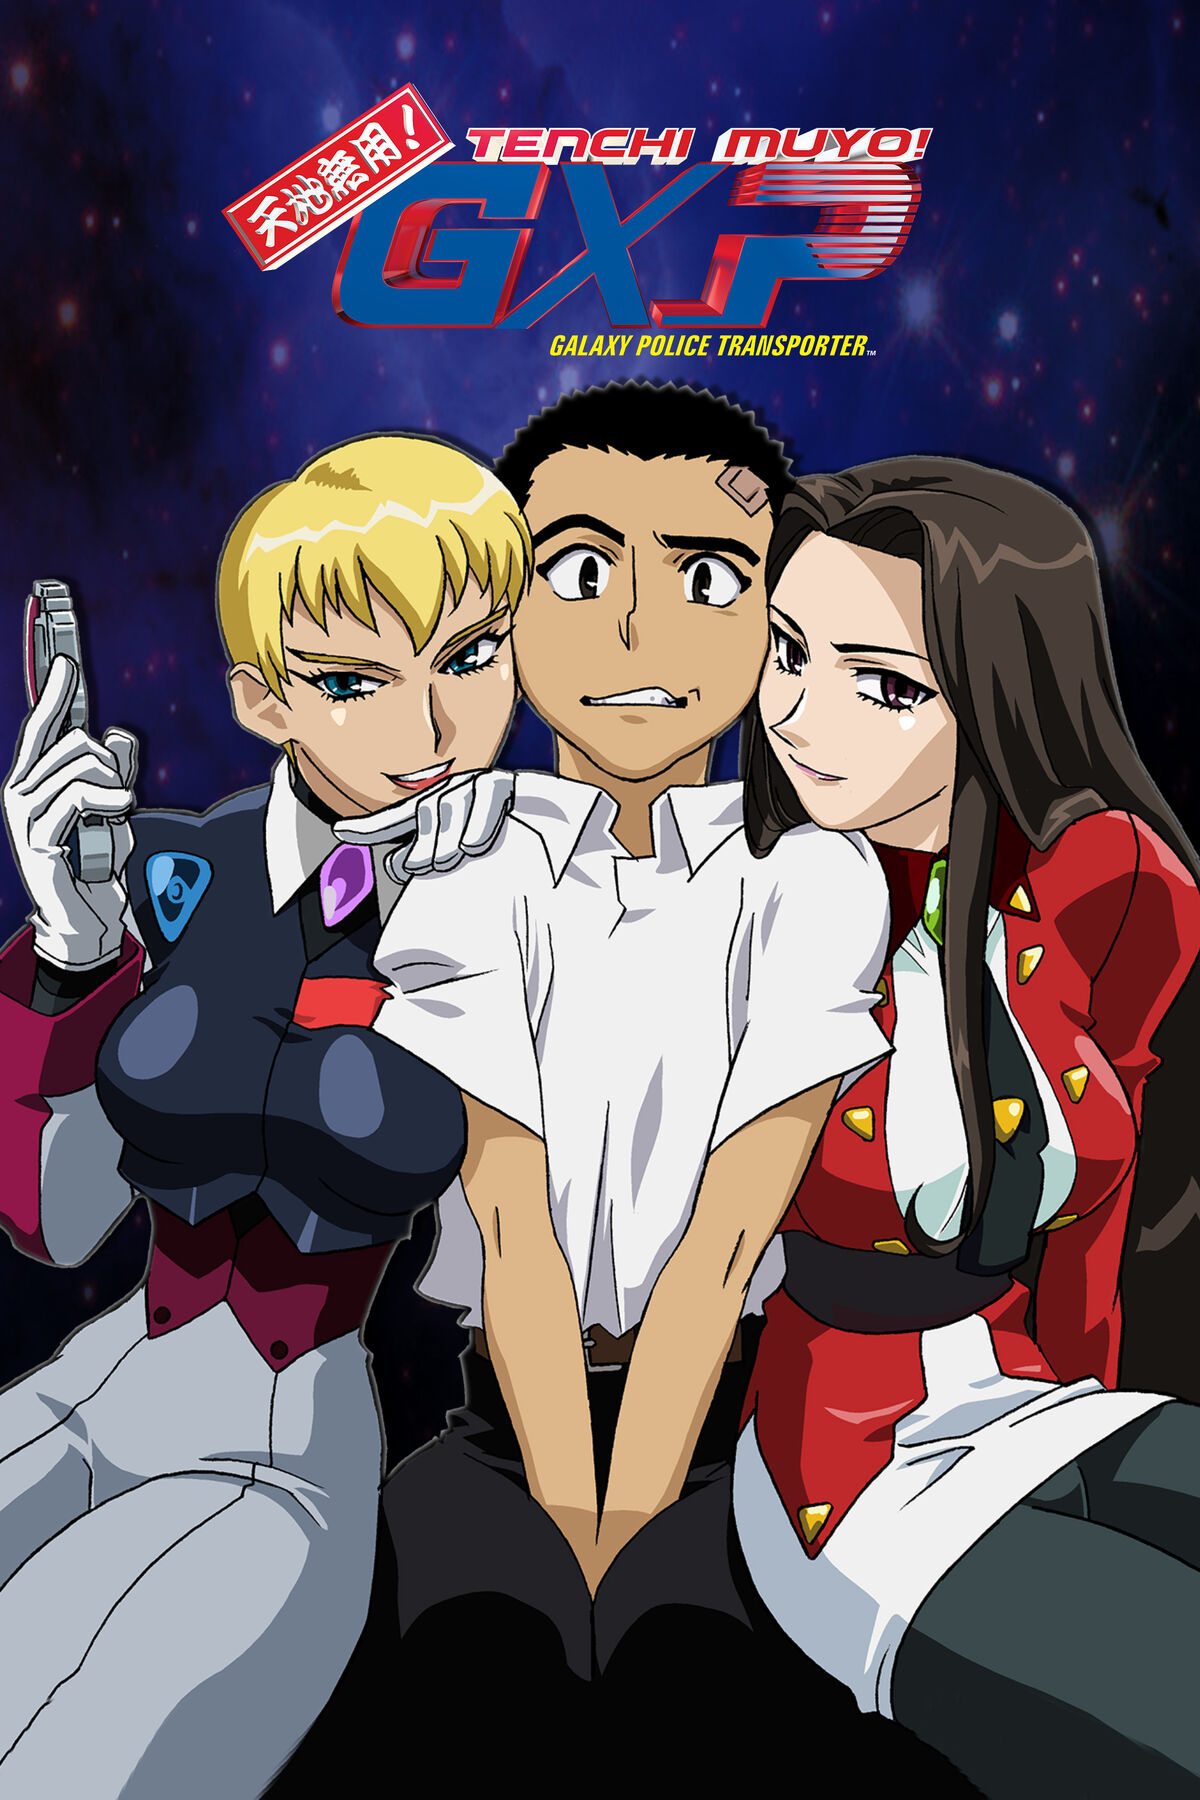 Tenchi's Thoughts: Another episode 11